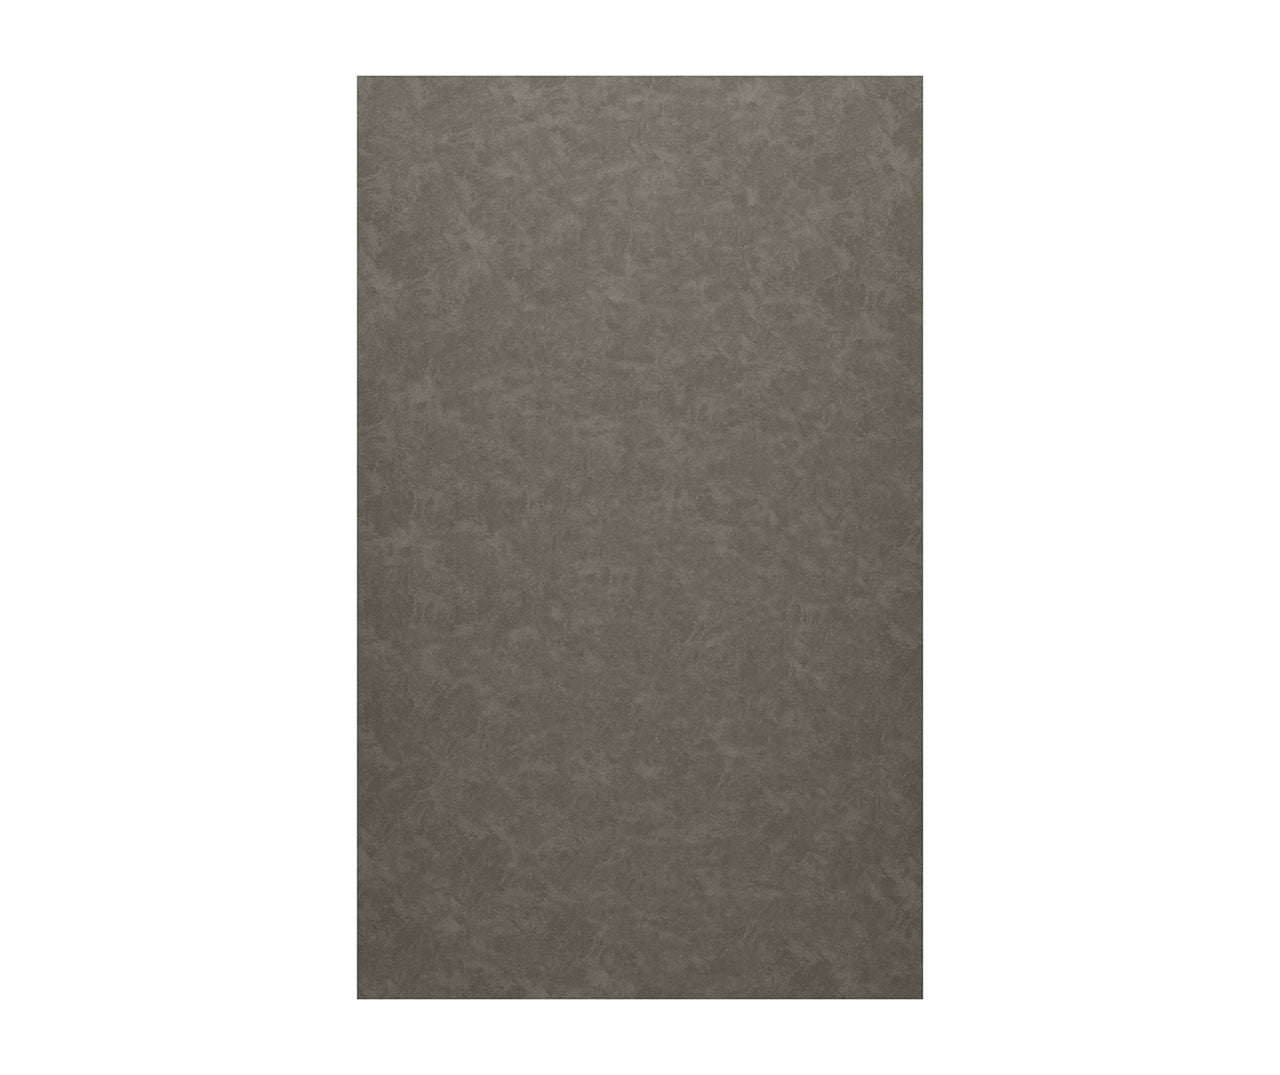 SS-3672-1 36 x 72 Swanstone Smooth Glue up Bathtub and Shower Single Wall Panel in Charcoal Gray